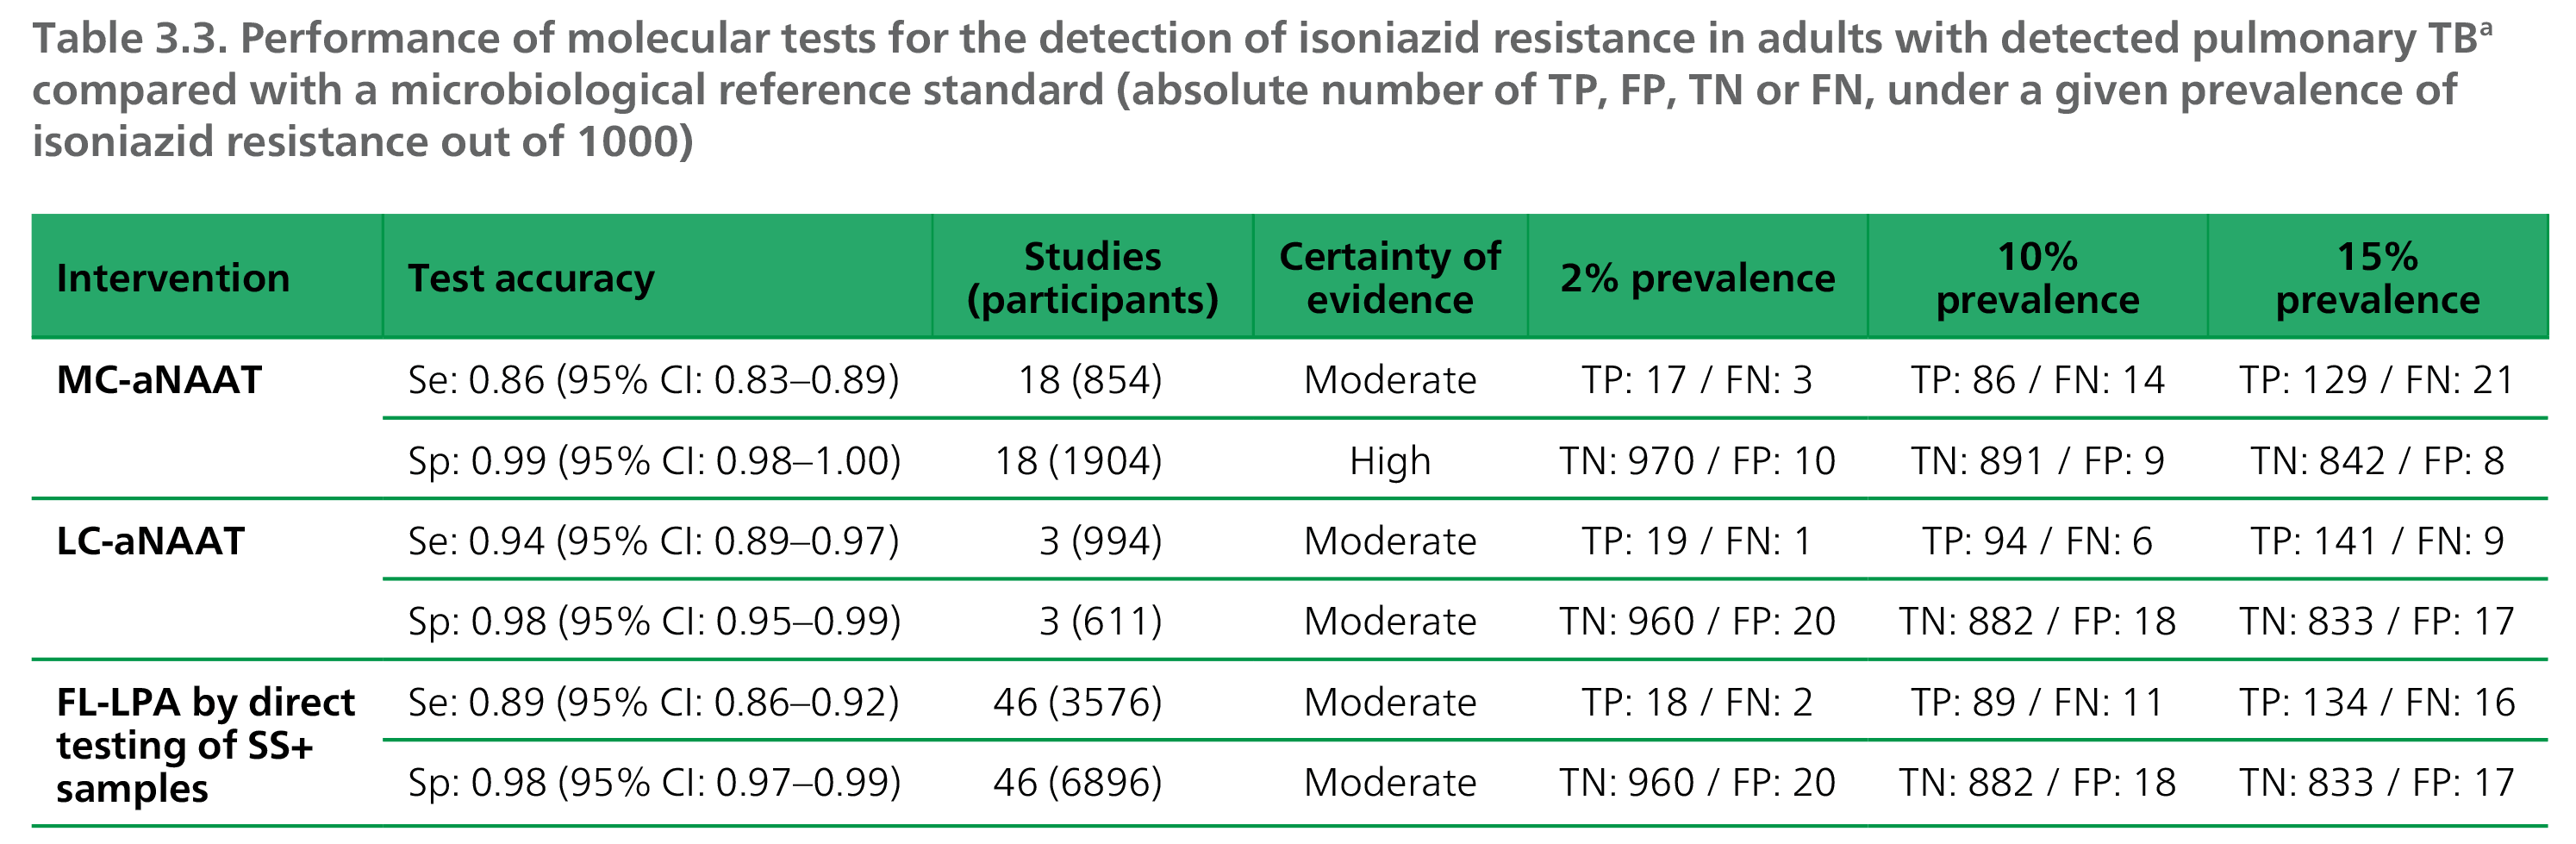  Performance of molecular tests for the detection of isoniazid resistance